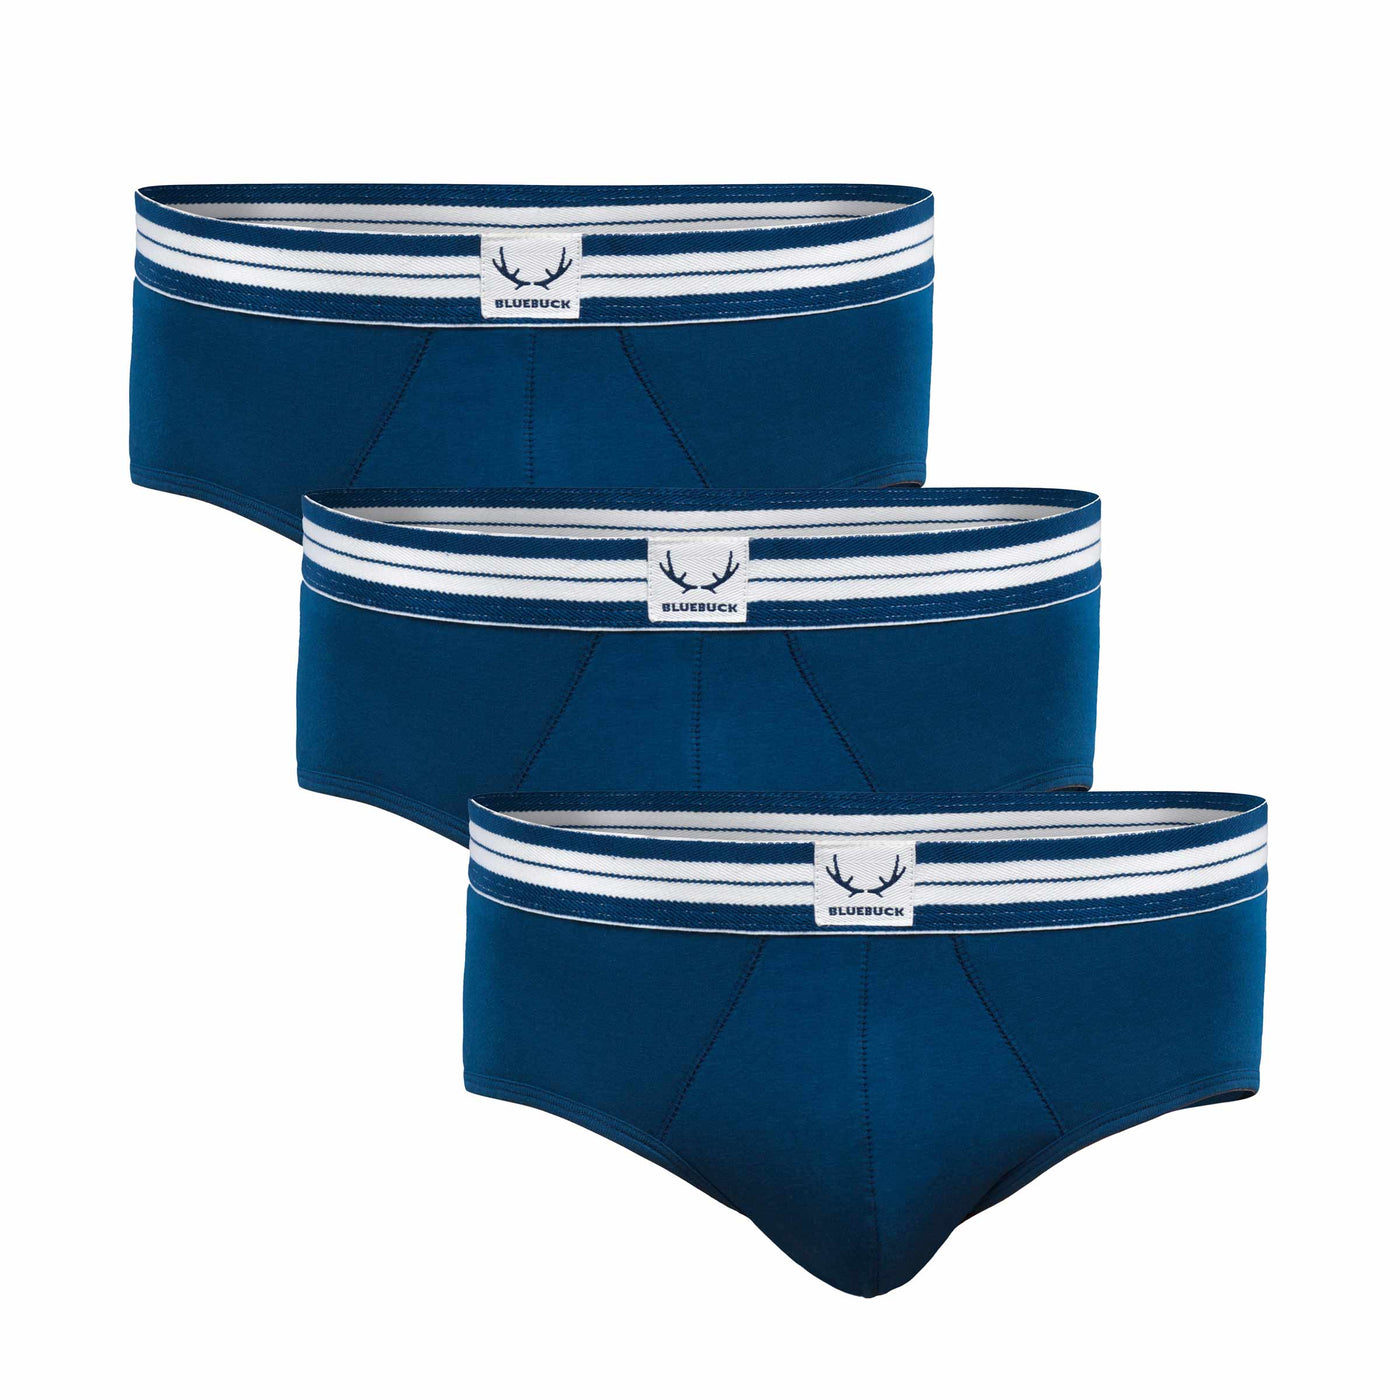 Pack of 3 navy blue classic briefs 